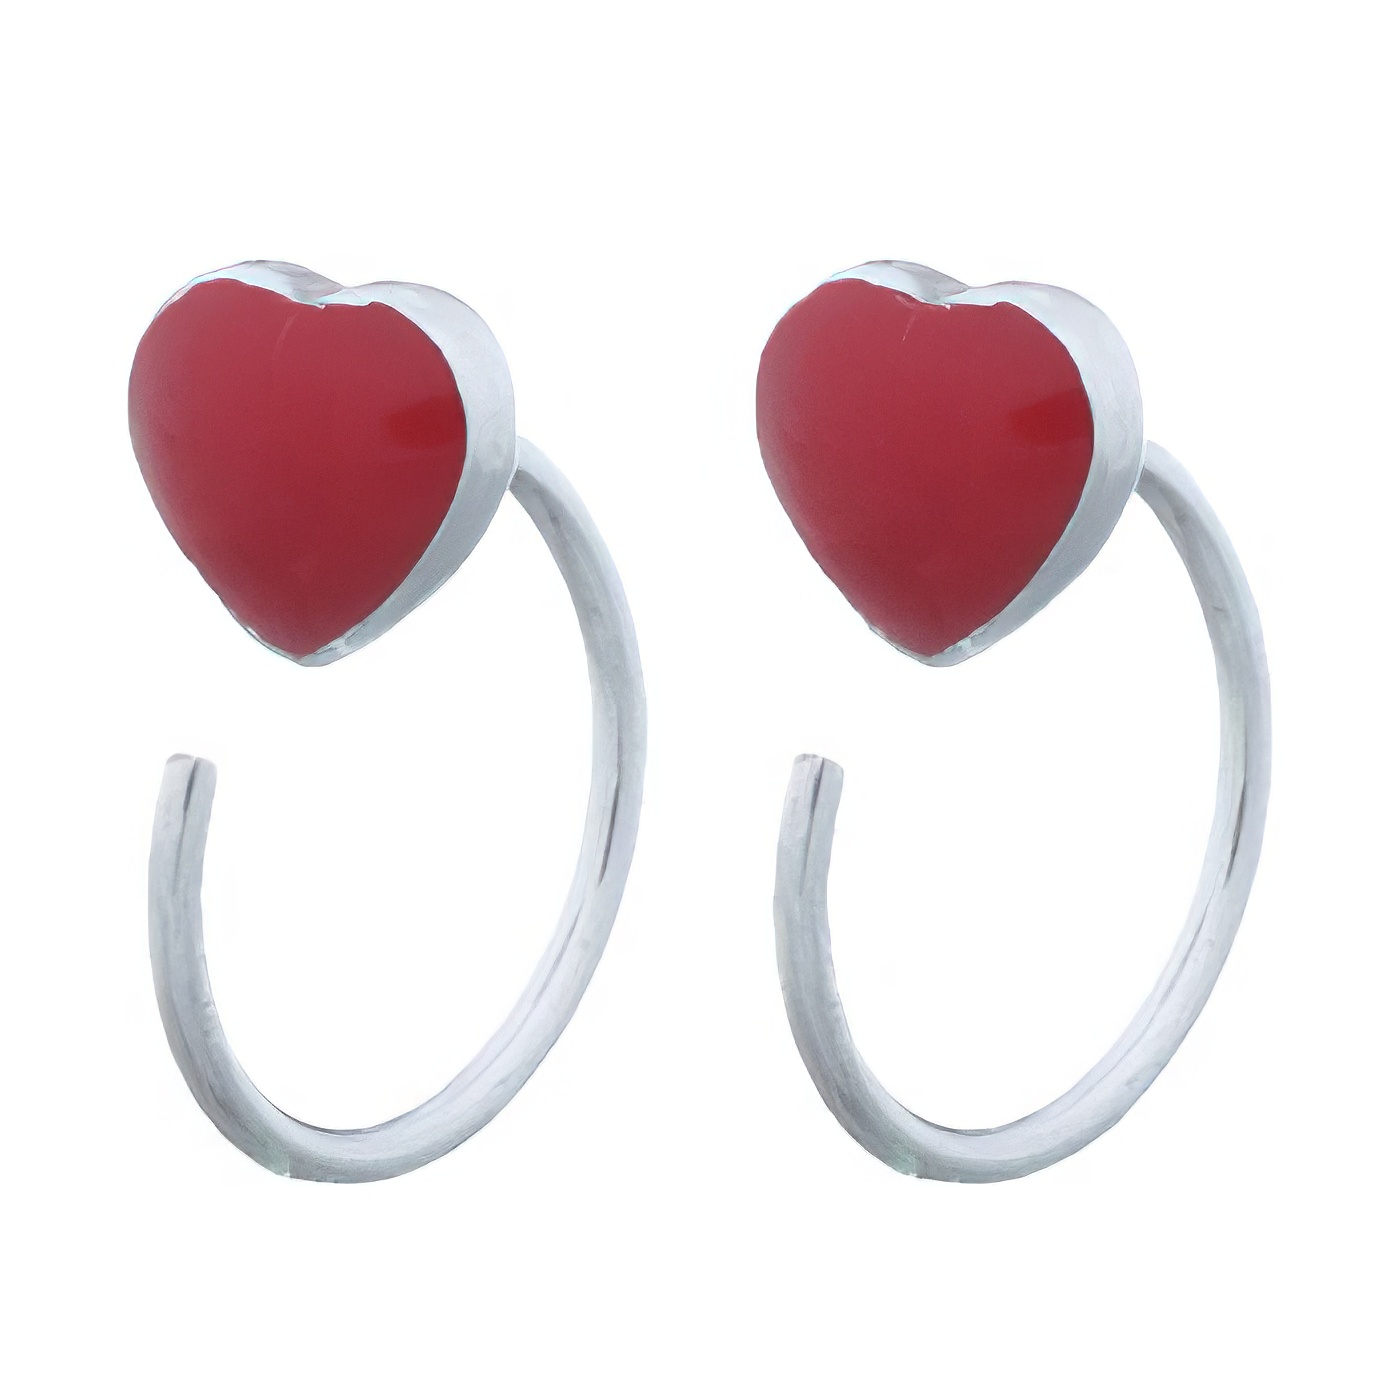 Reconstituted Stone Red Heart 925 Silver Huggie Drop Earrings by BeYindi 